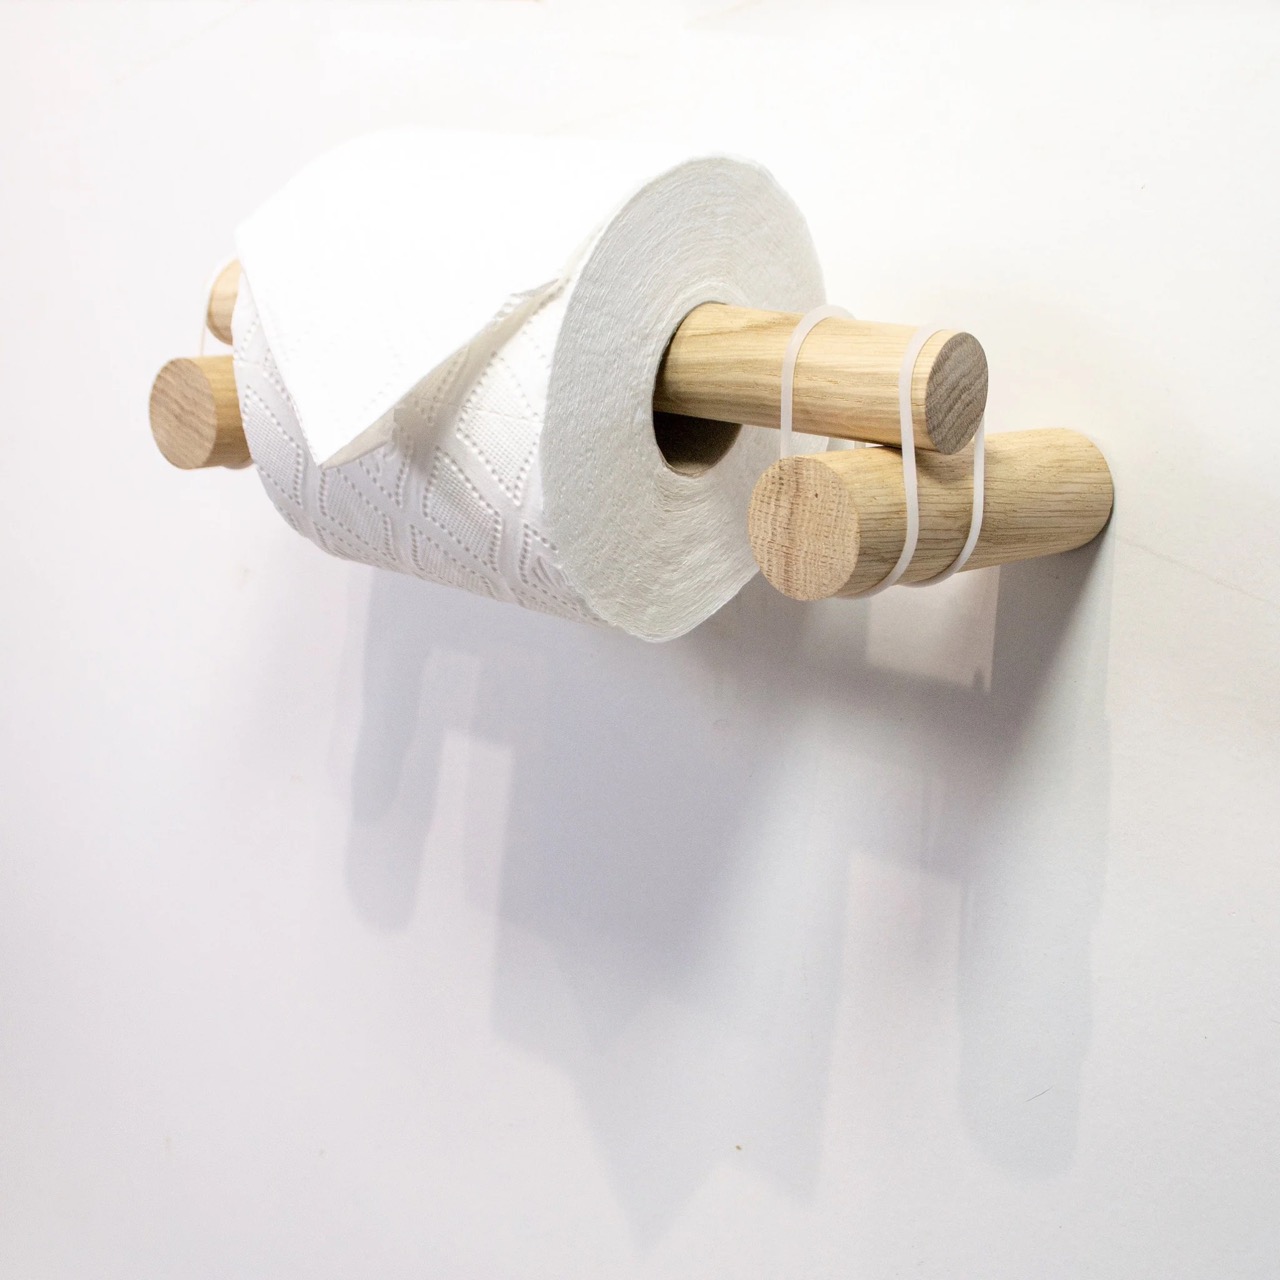 How To Install A Toilet Paper Holder In The Wall